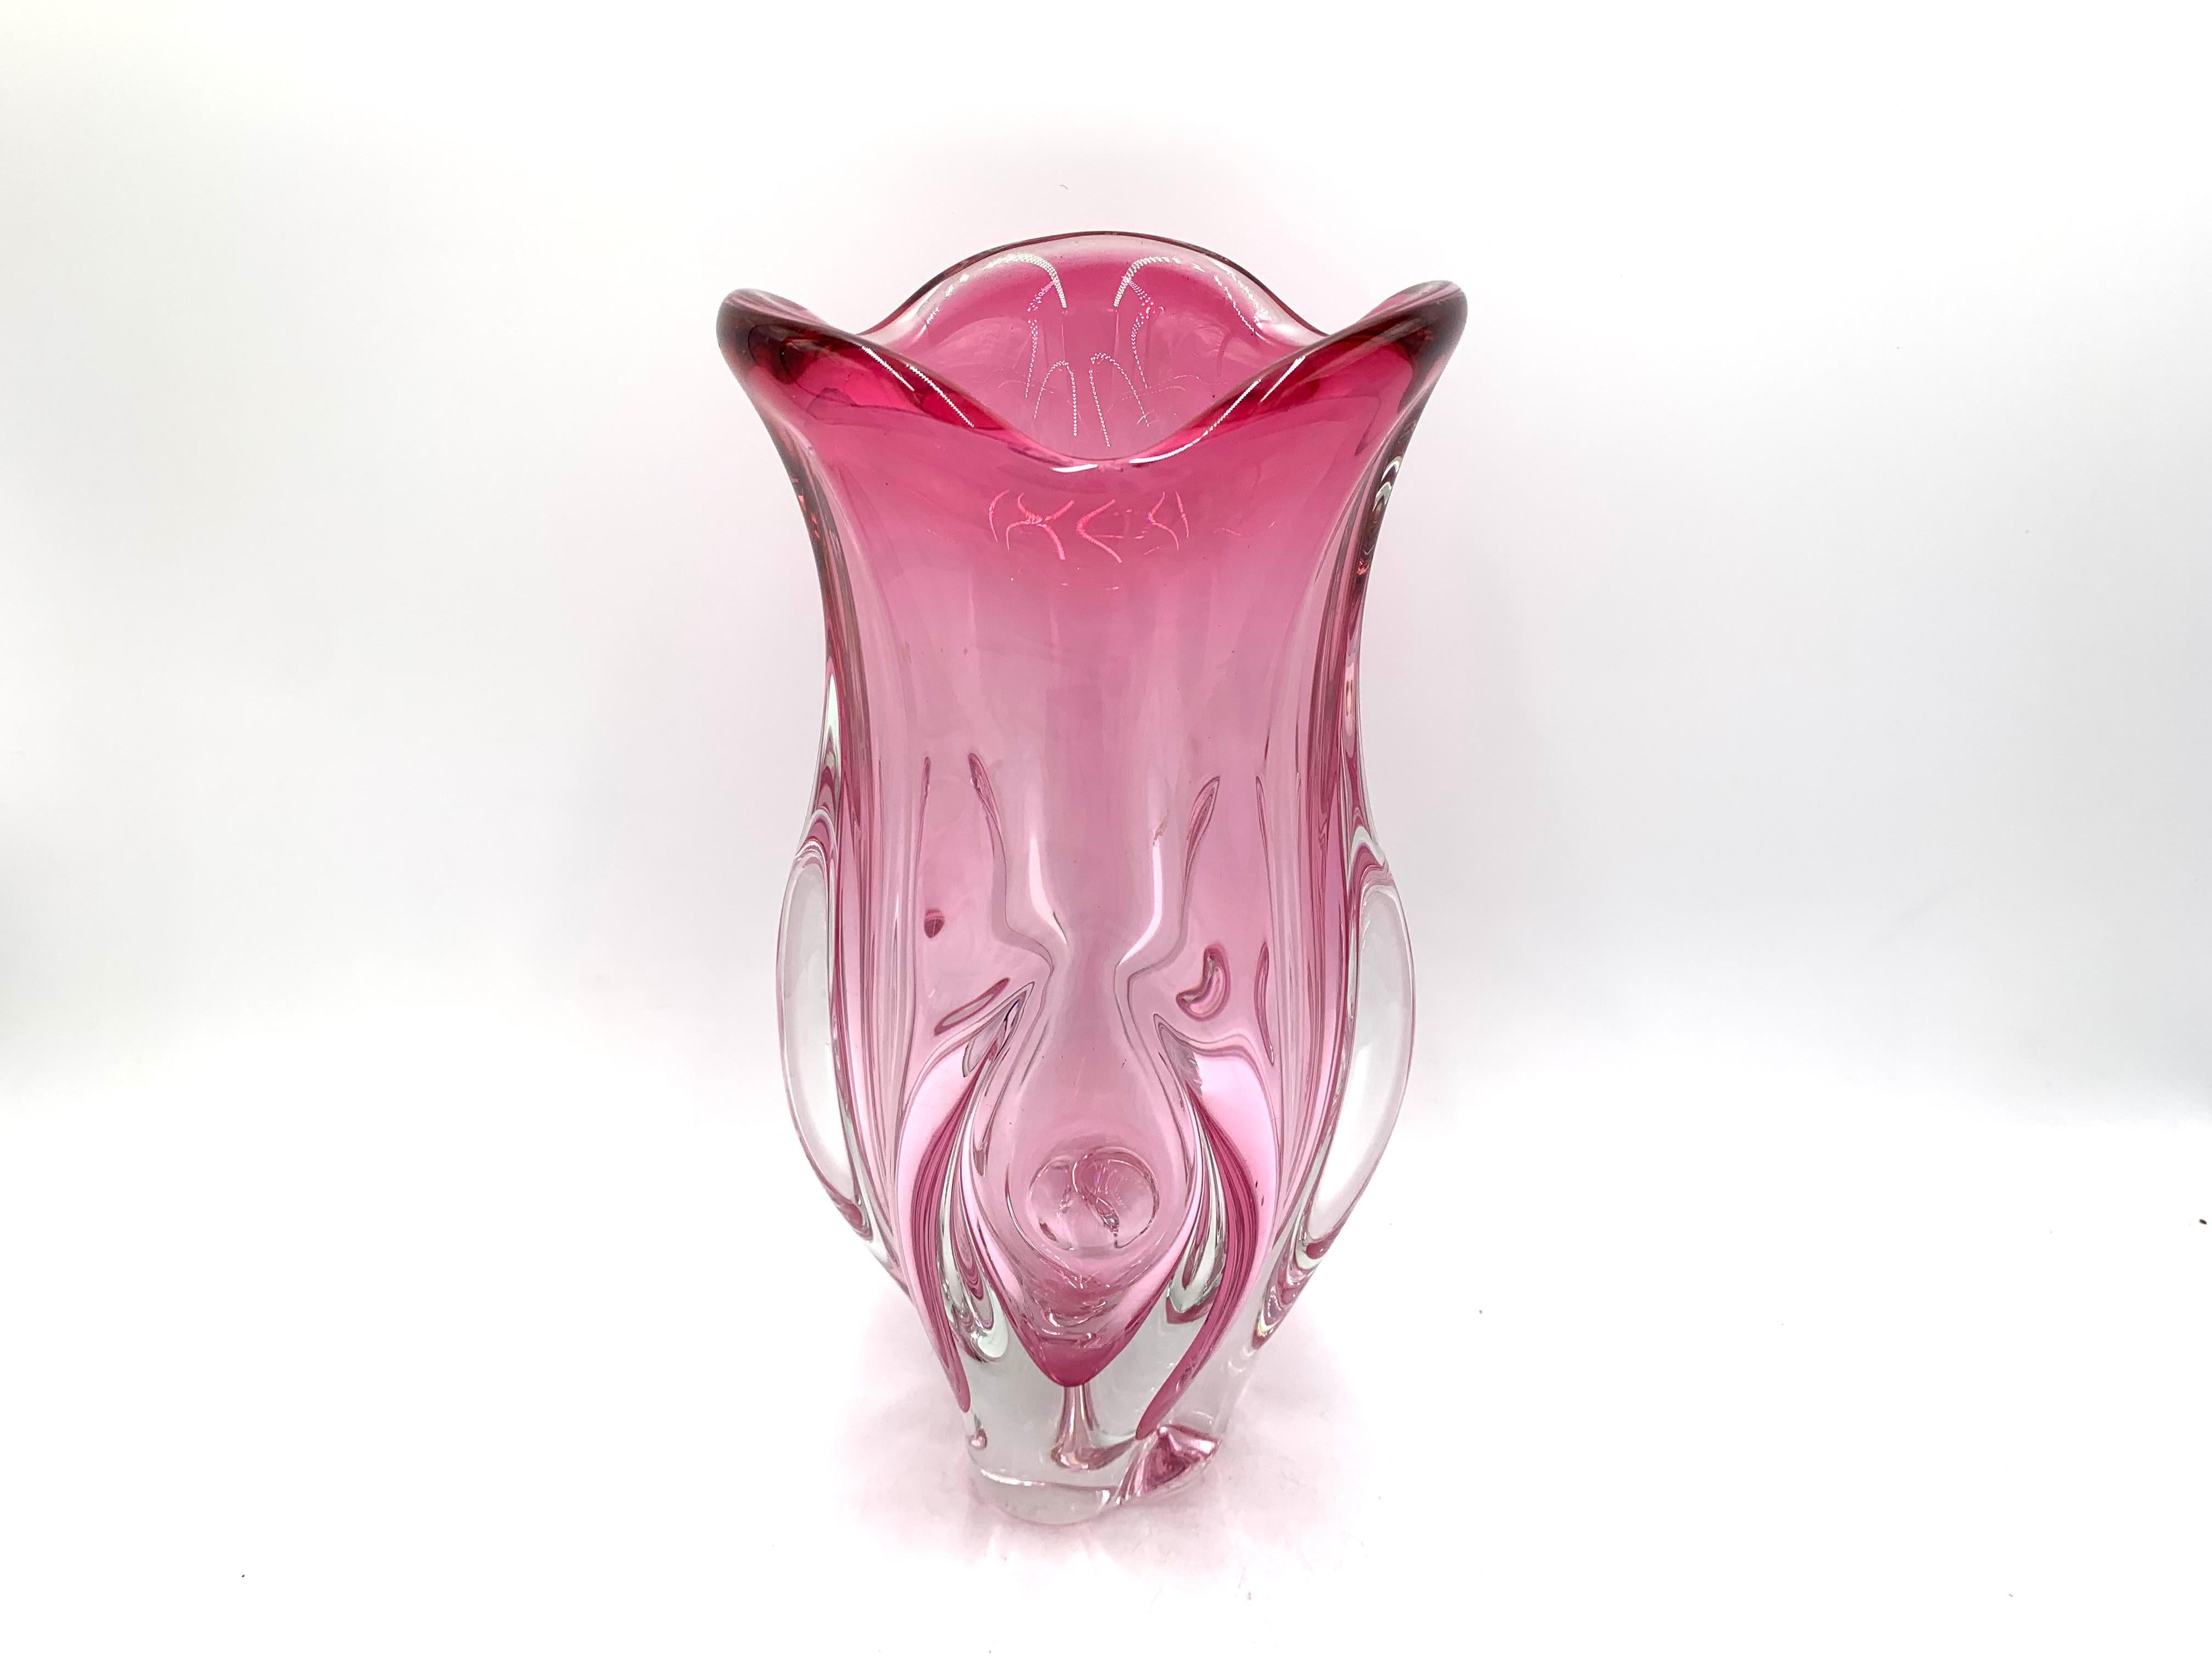 A large heavy vase made of art glass in a pink color.

Produced by Chribska Sklarna in Czechoslovakia in the 1960s.

Very good condition.

Measures: Height 32.5 cm. Diameter 16 cm.